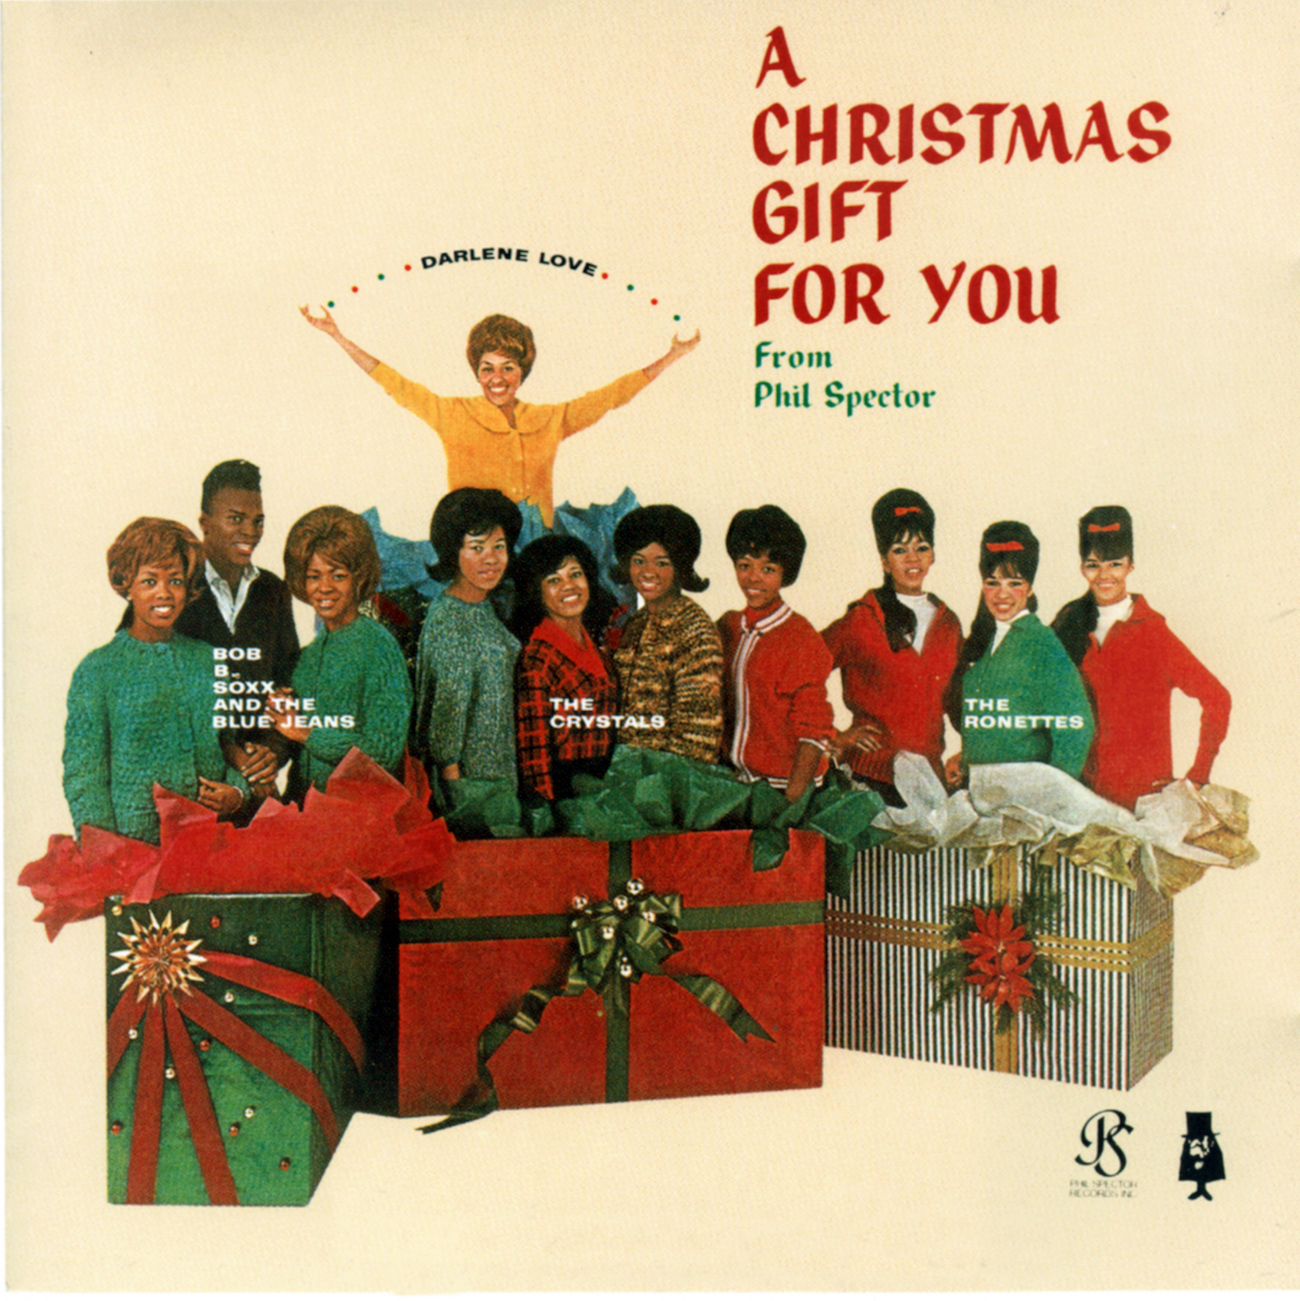 'A Christmas Gift for You From Phil Spector' album cover in 1963.